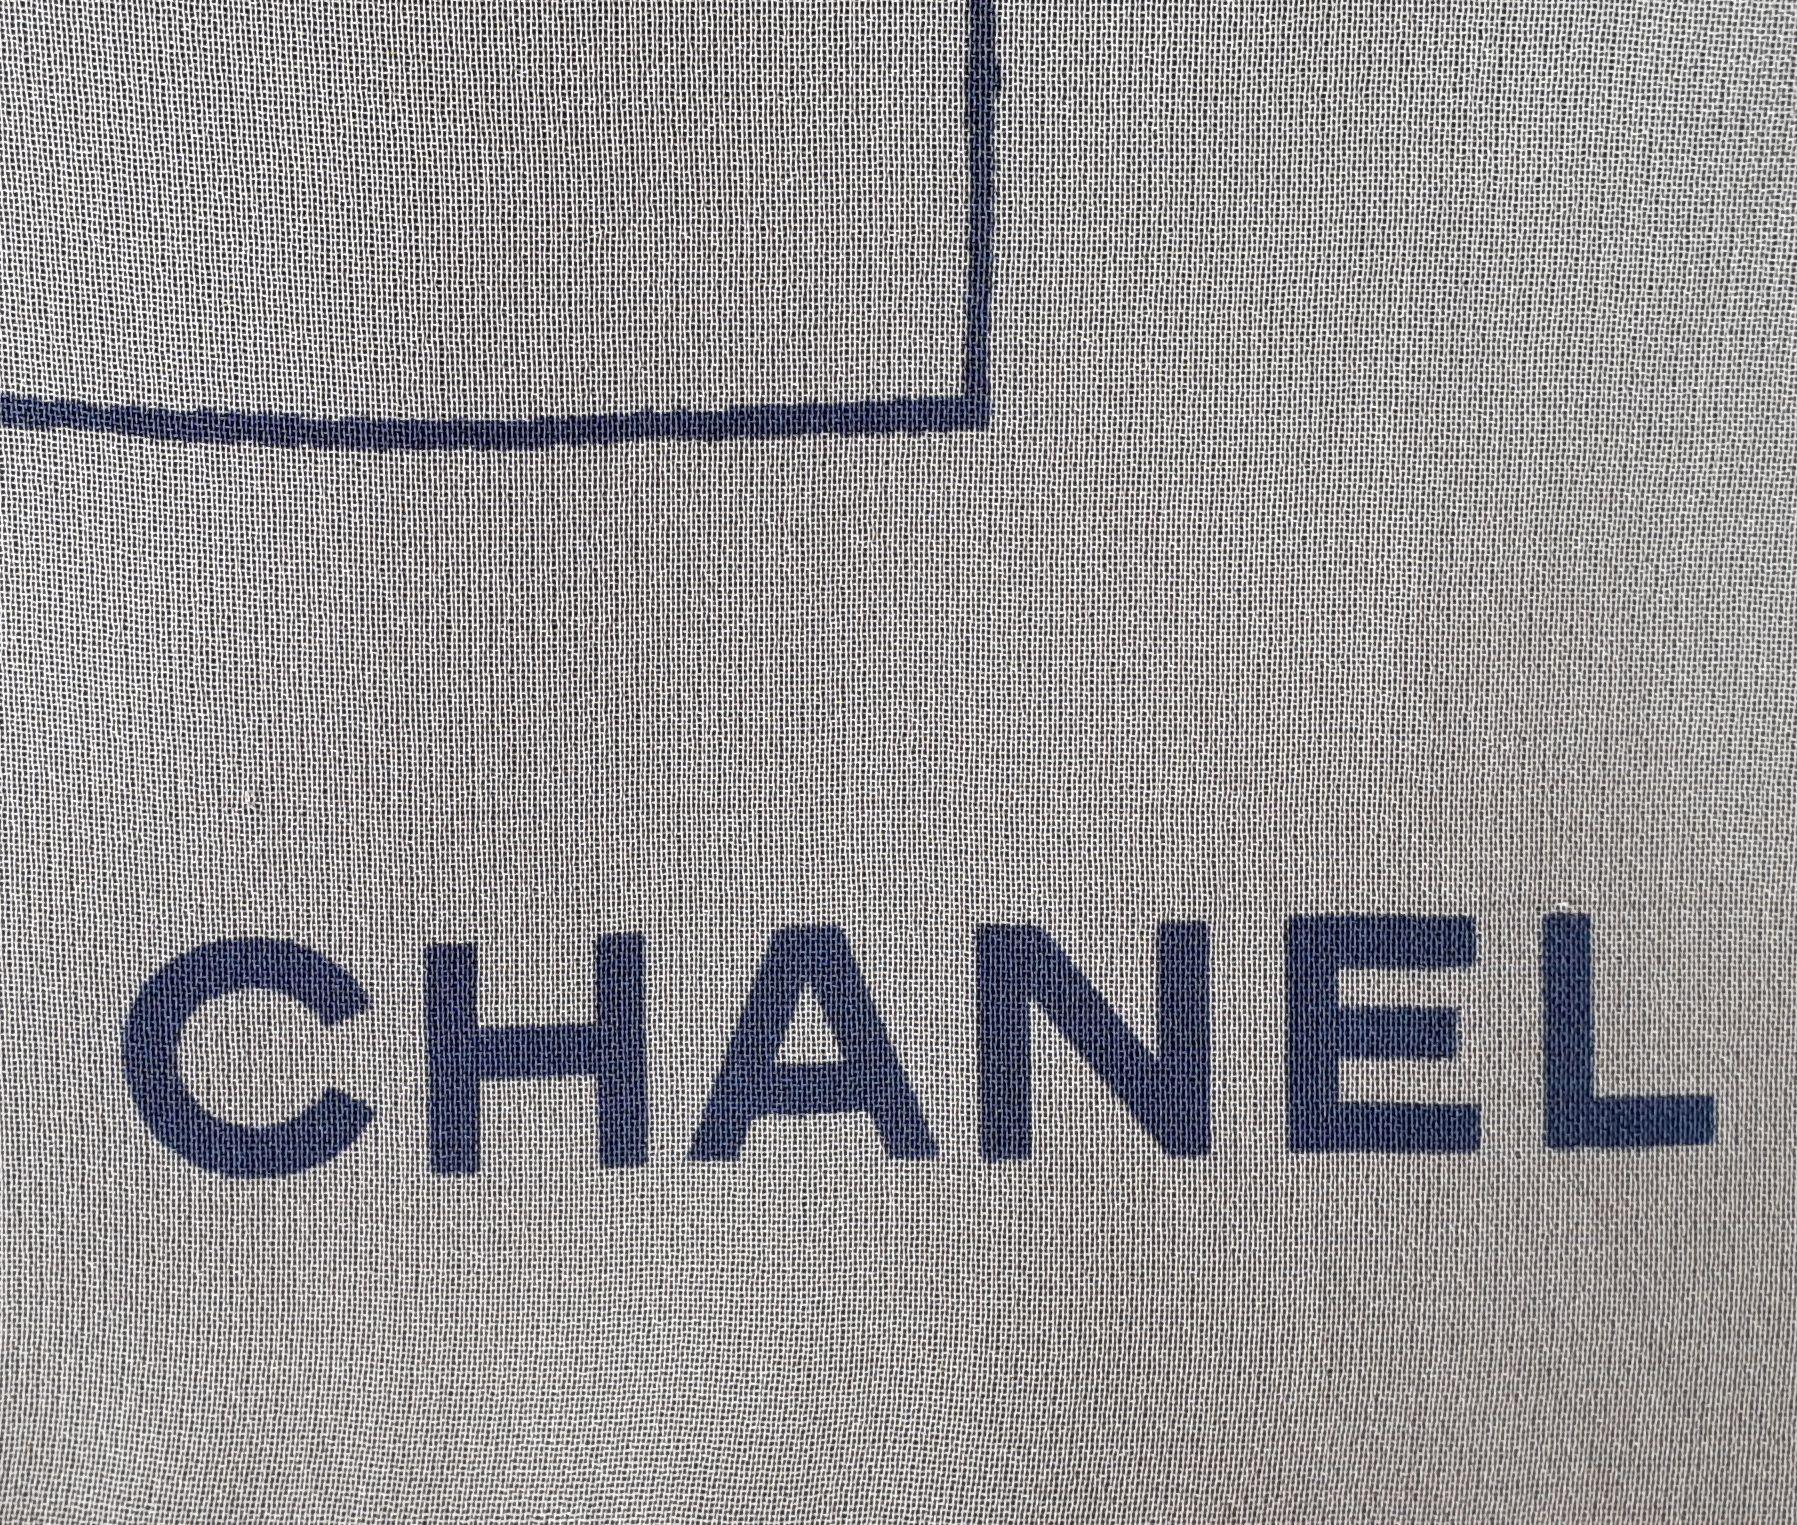 Beautiful Authentic CHANEL Scarf

